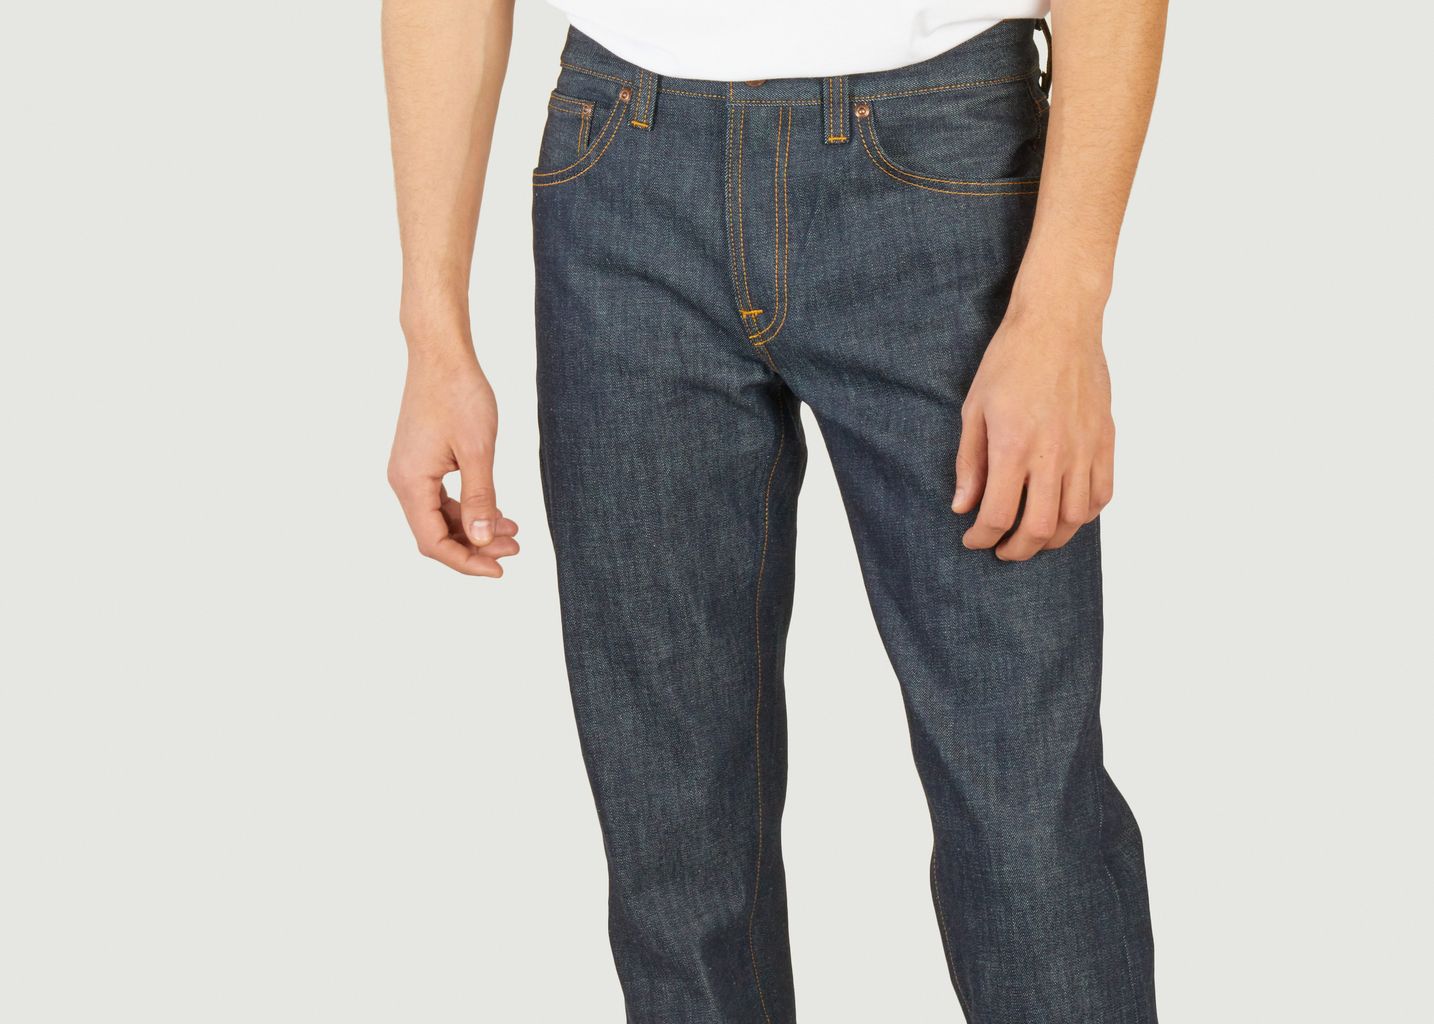 Gritty Jackson jeans - Nudie Jeans